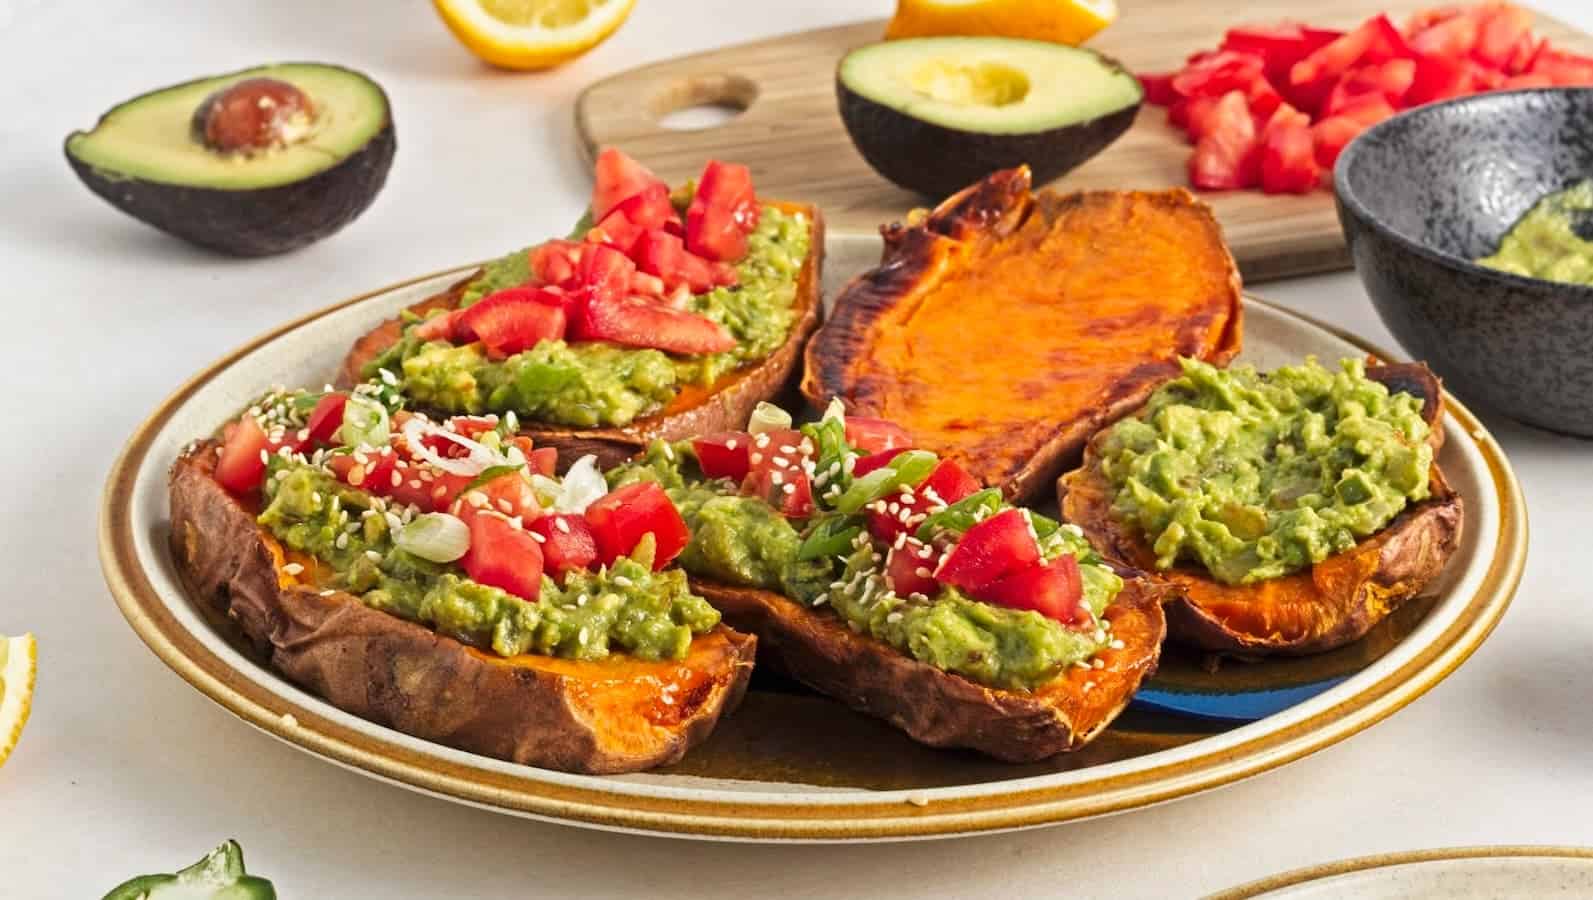 Plate of sweet potato halves topped with guacamole, chopped tomatoes, and sesame seeds. Halved avocado and chopped tomatoes in the background.